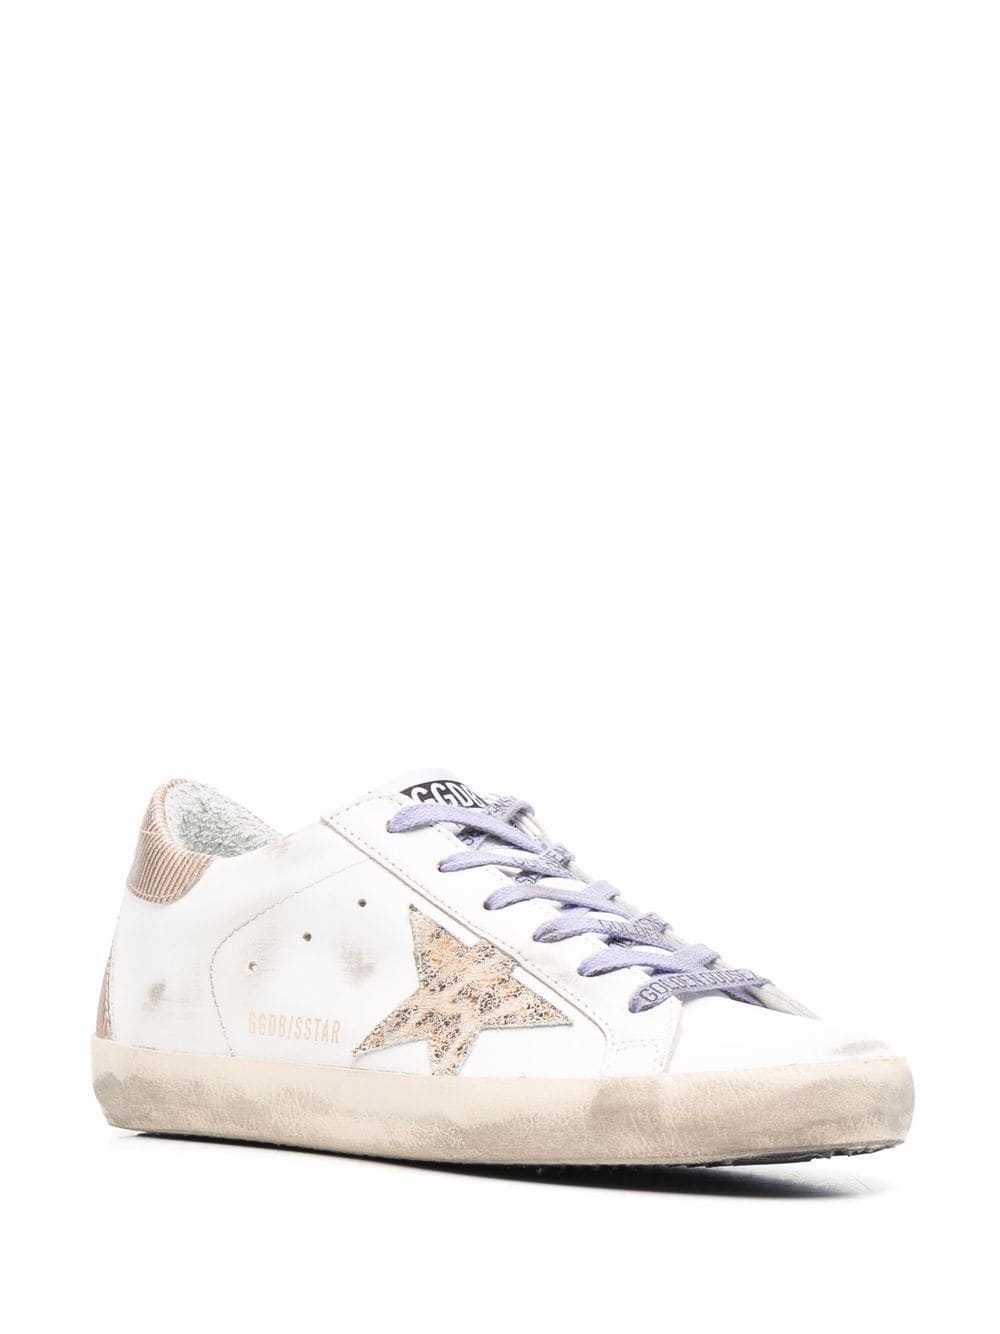 Golden Goose Deluxe Brand Shoes White Woman - 2